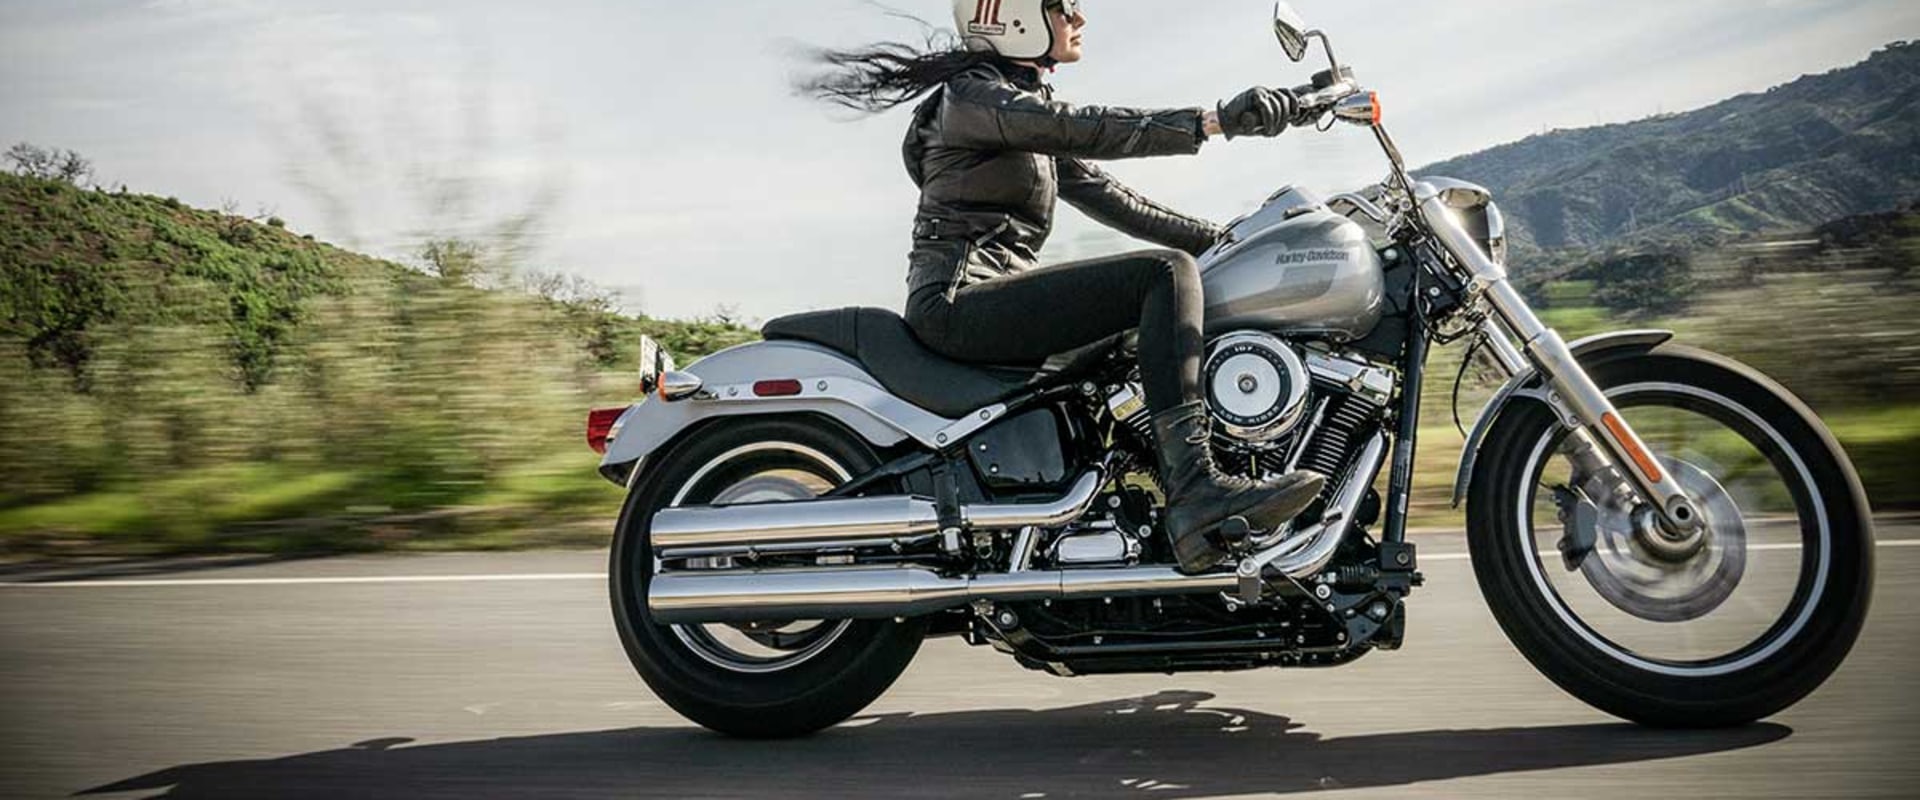 Best Motorcycle Insurance for New Owners